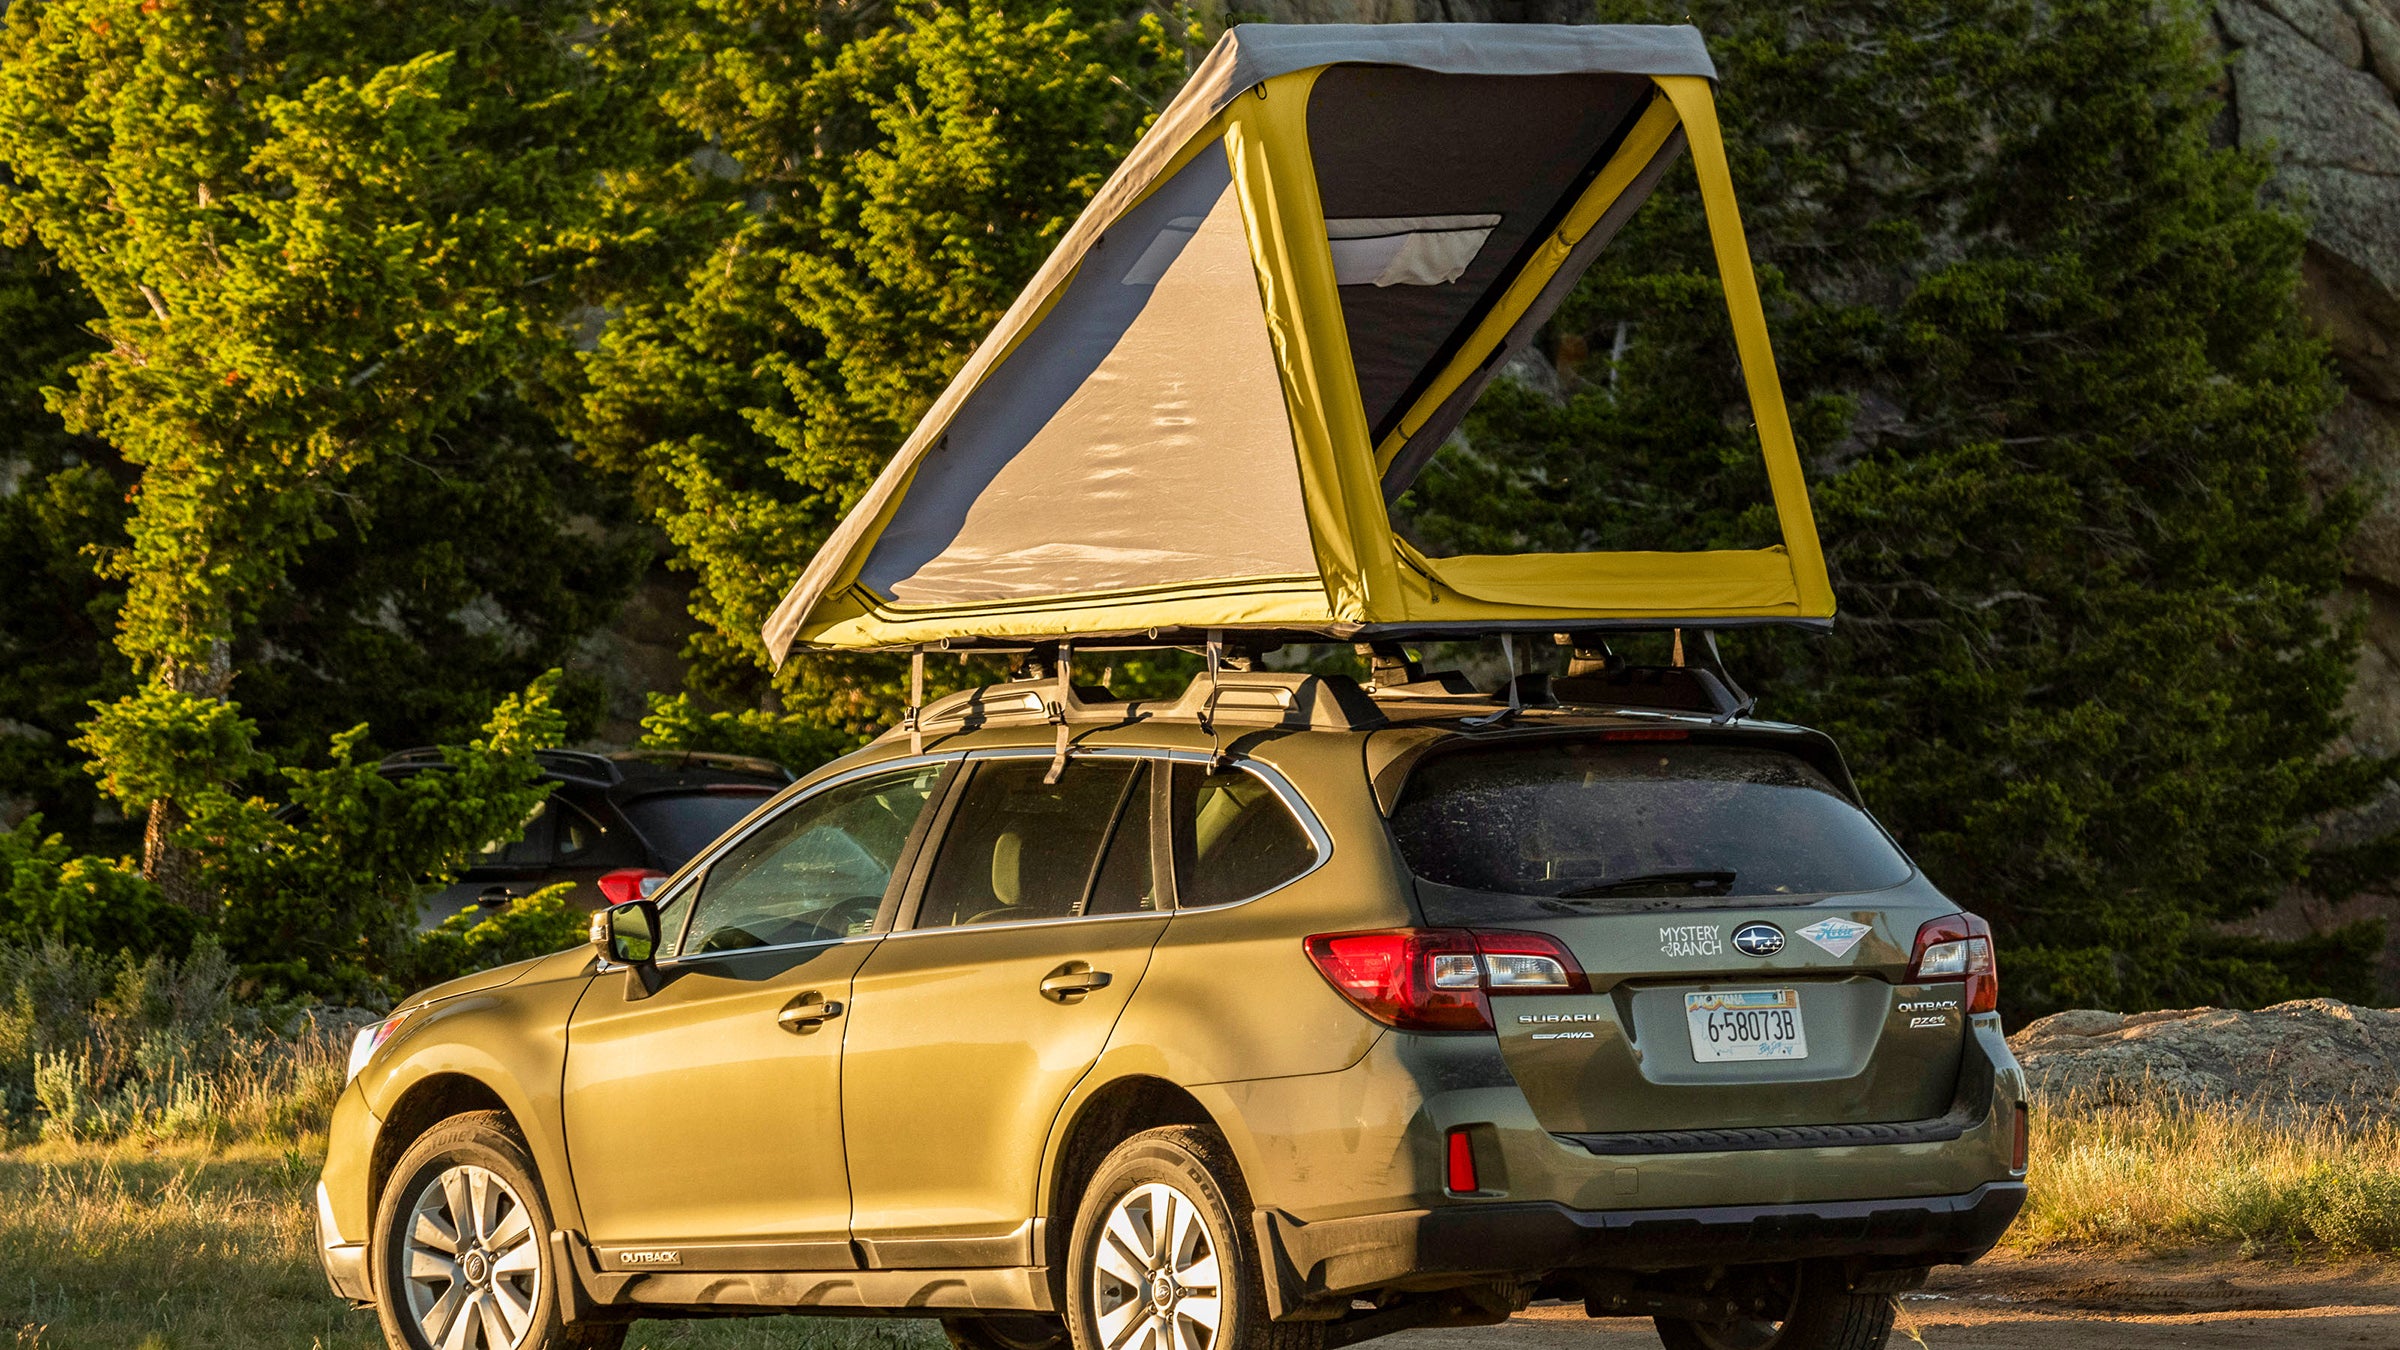 Hey Look, a Rooftop Tent That Won't Ruin Your Car